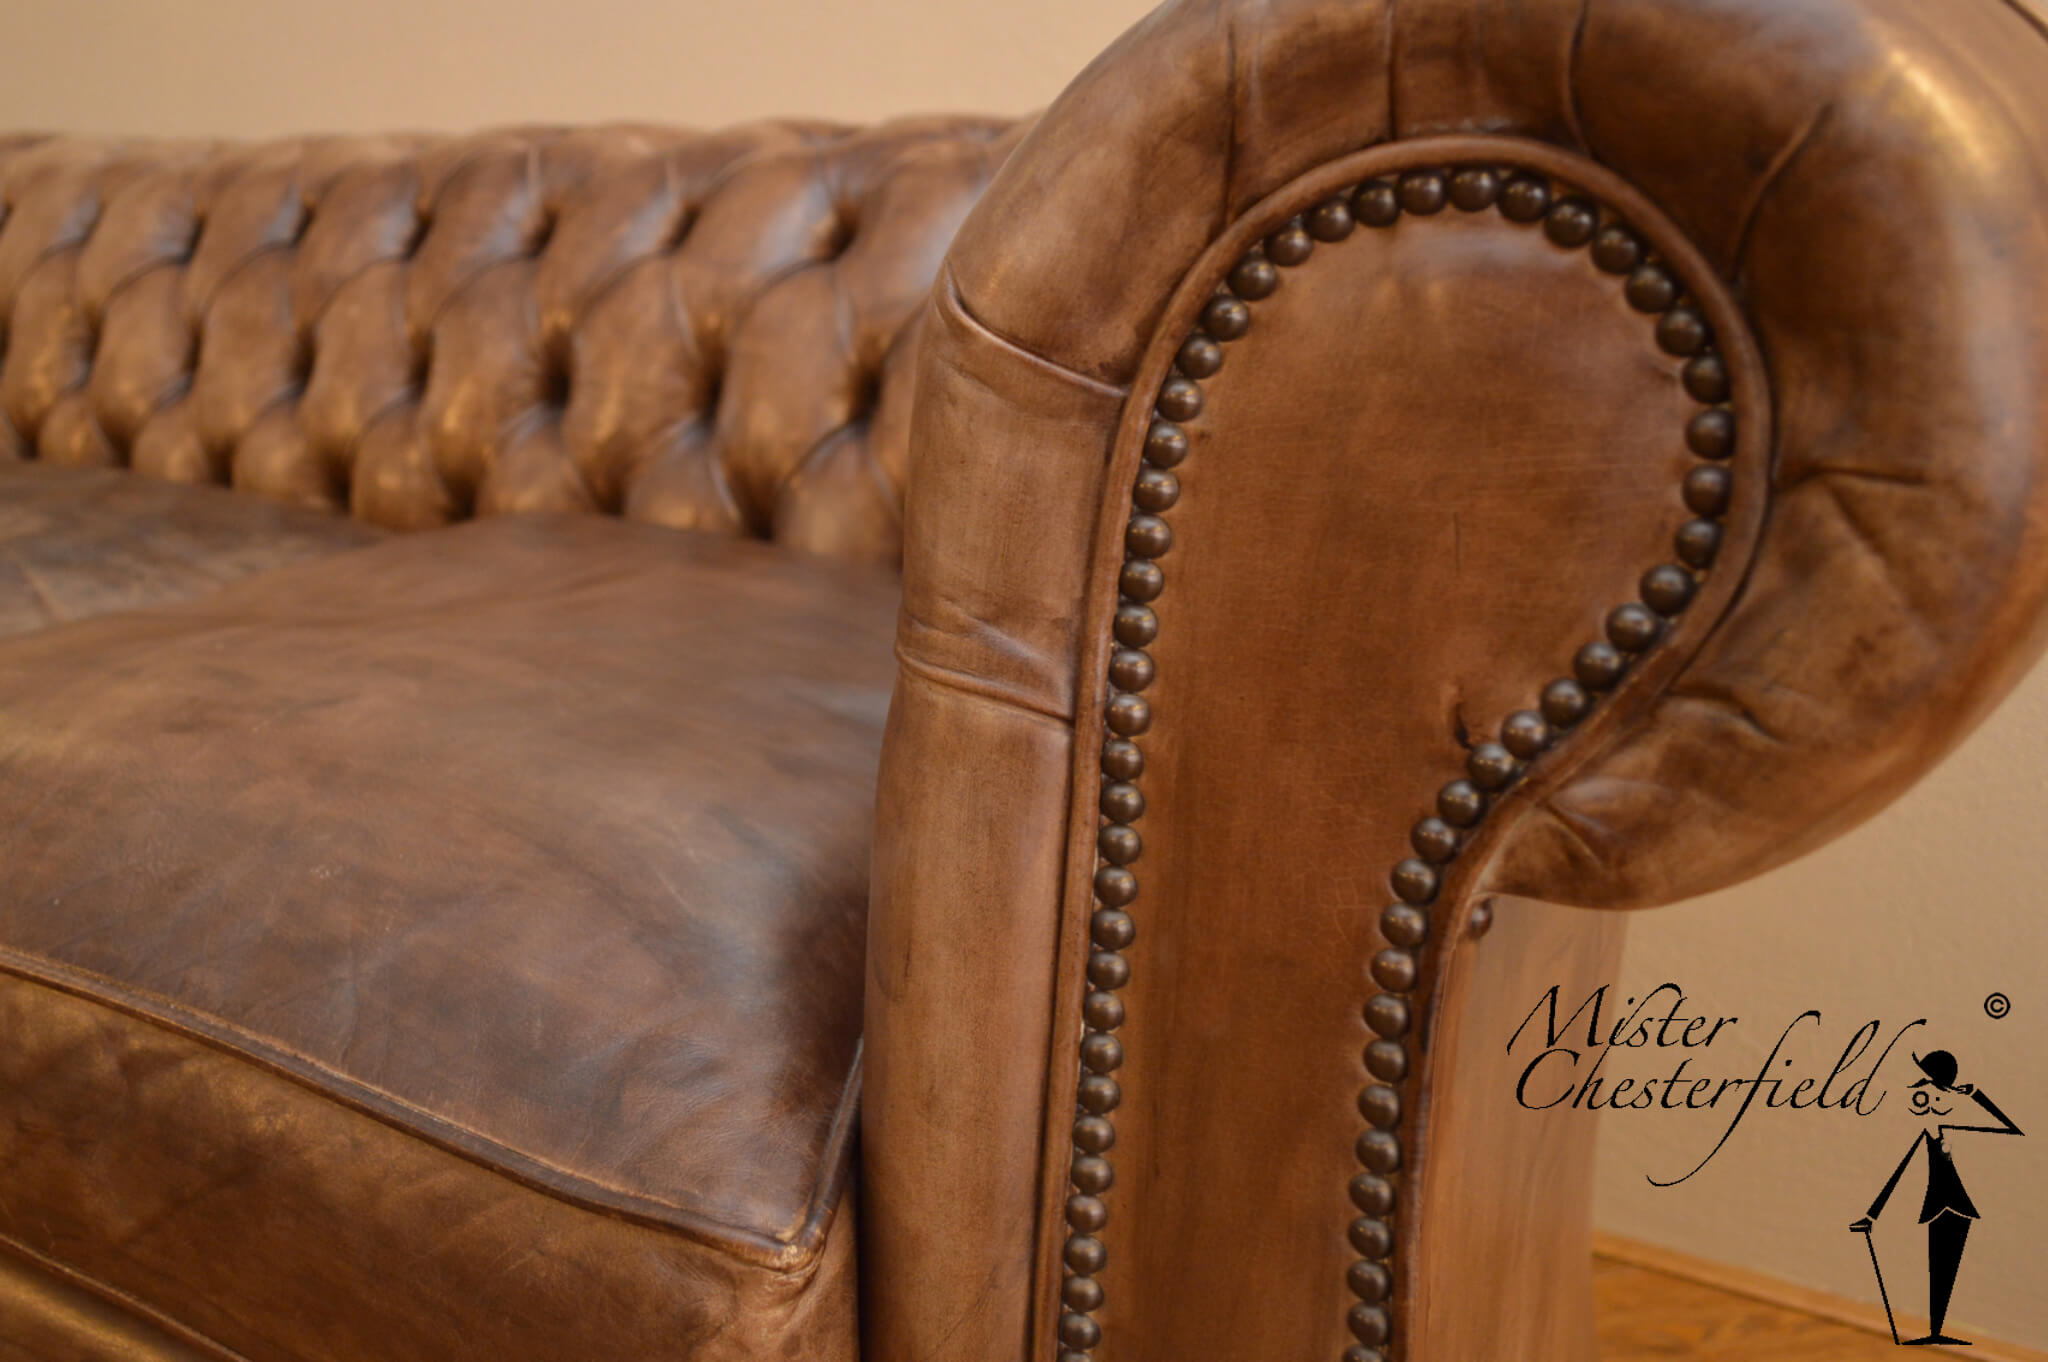 Chesterfield-vintage-oud-detail-2